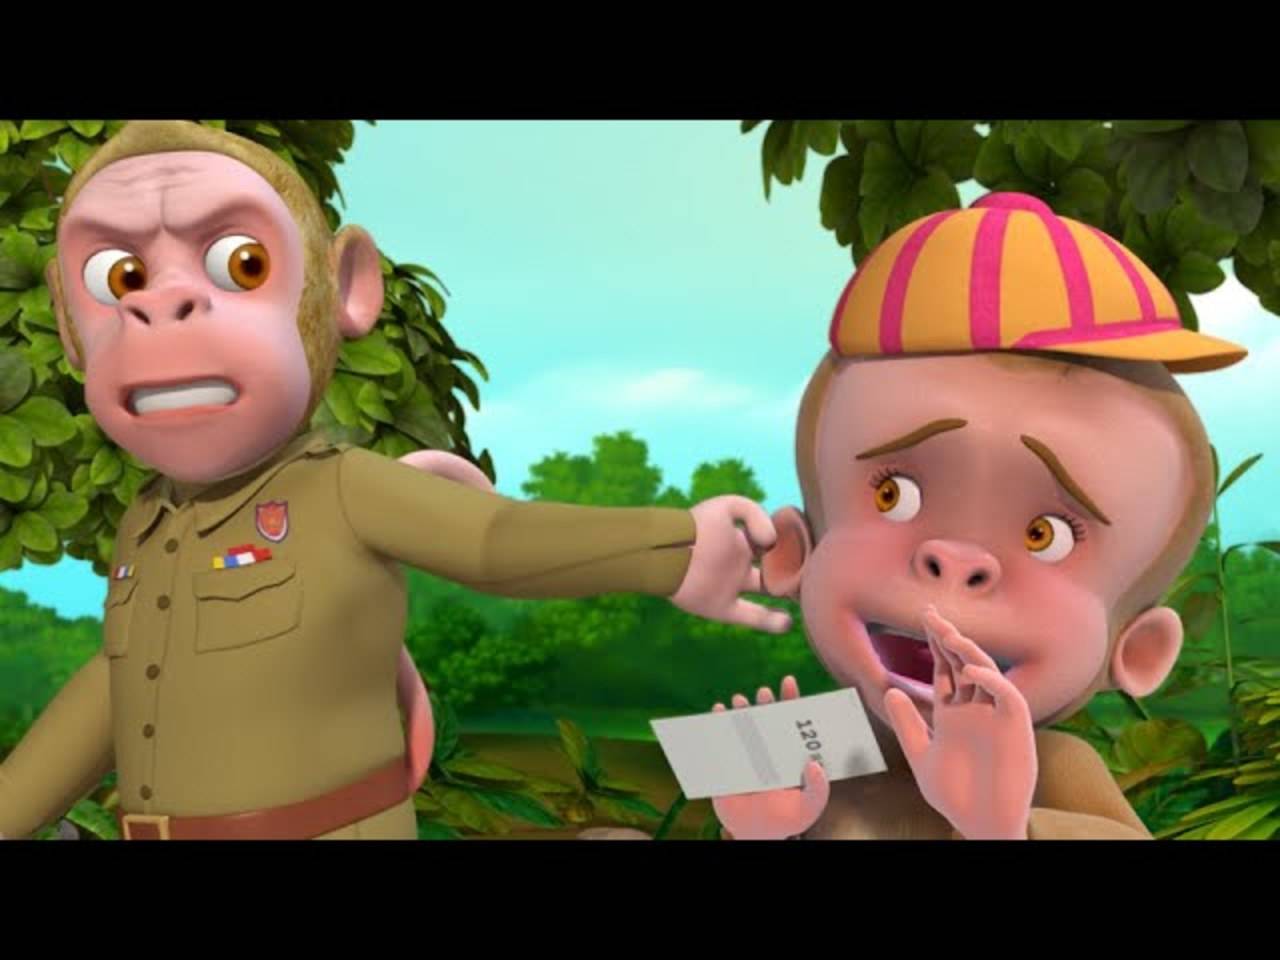 Watch Popular Children Bengali Nursery Rhyme 'Monkey' For Kids - Check Out  Fun Kids Nursery Rhymes And Baby Songs In Bengali | Entertainment - Times  of India Videos